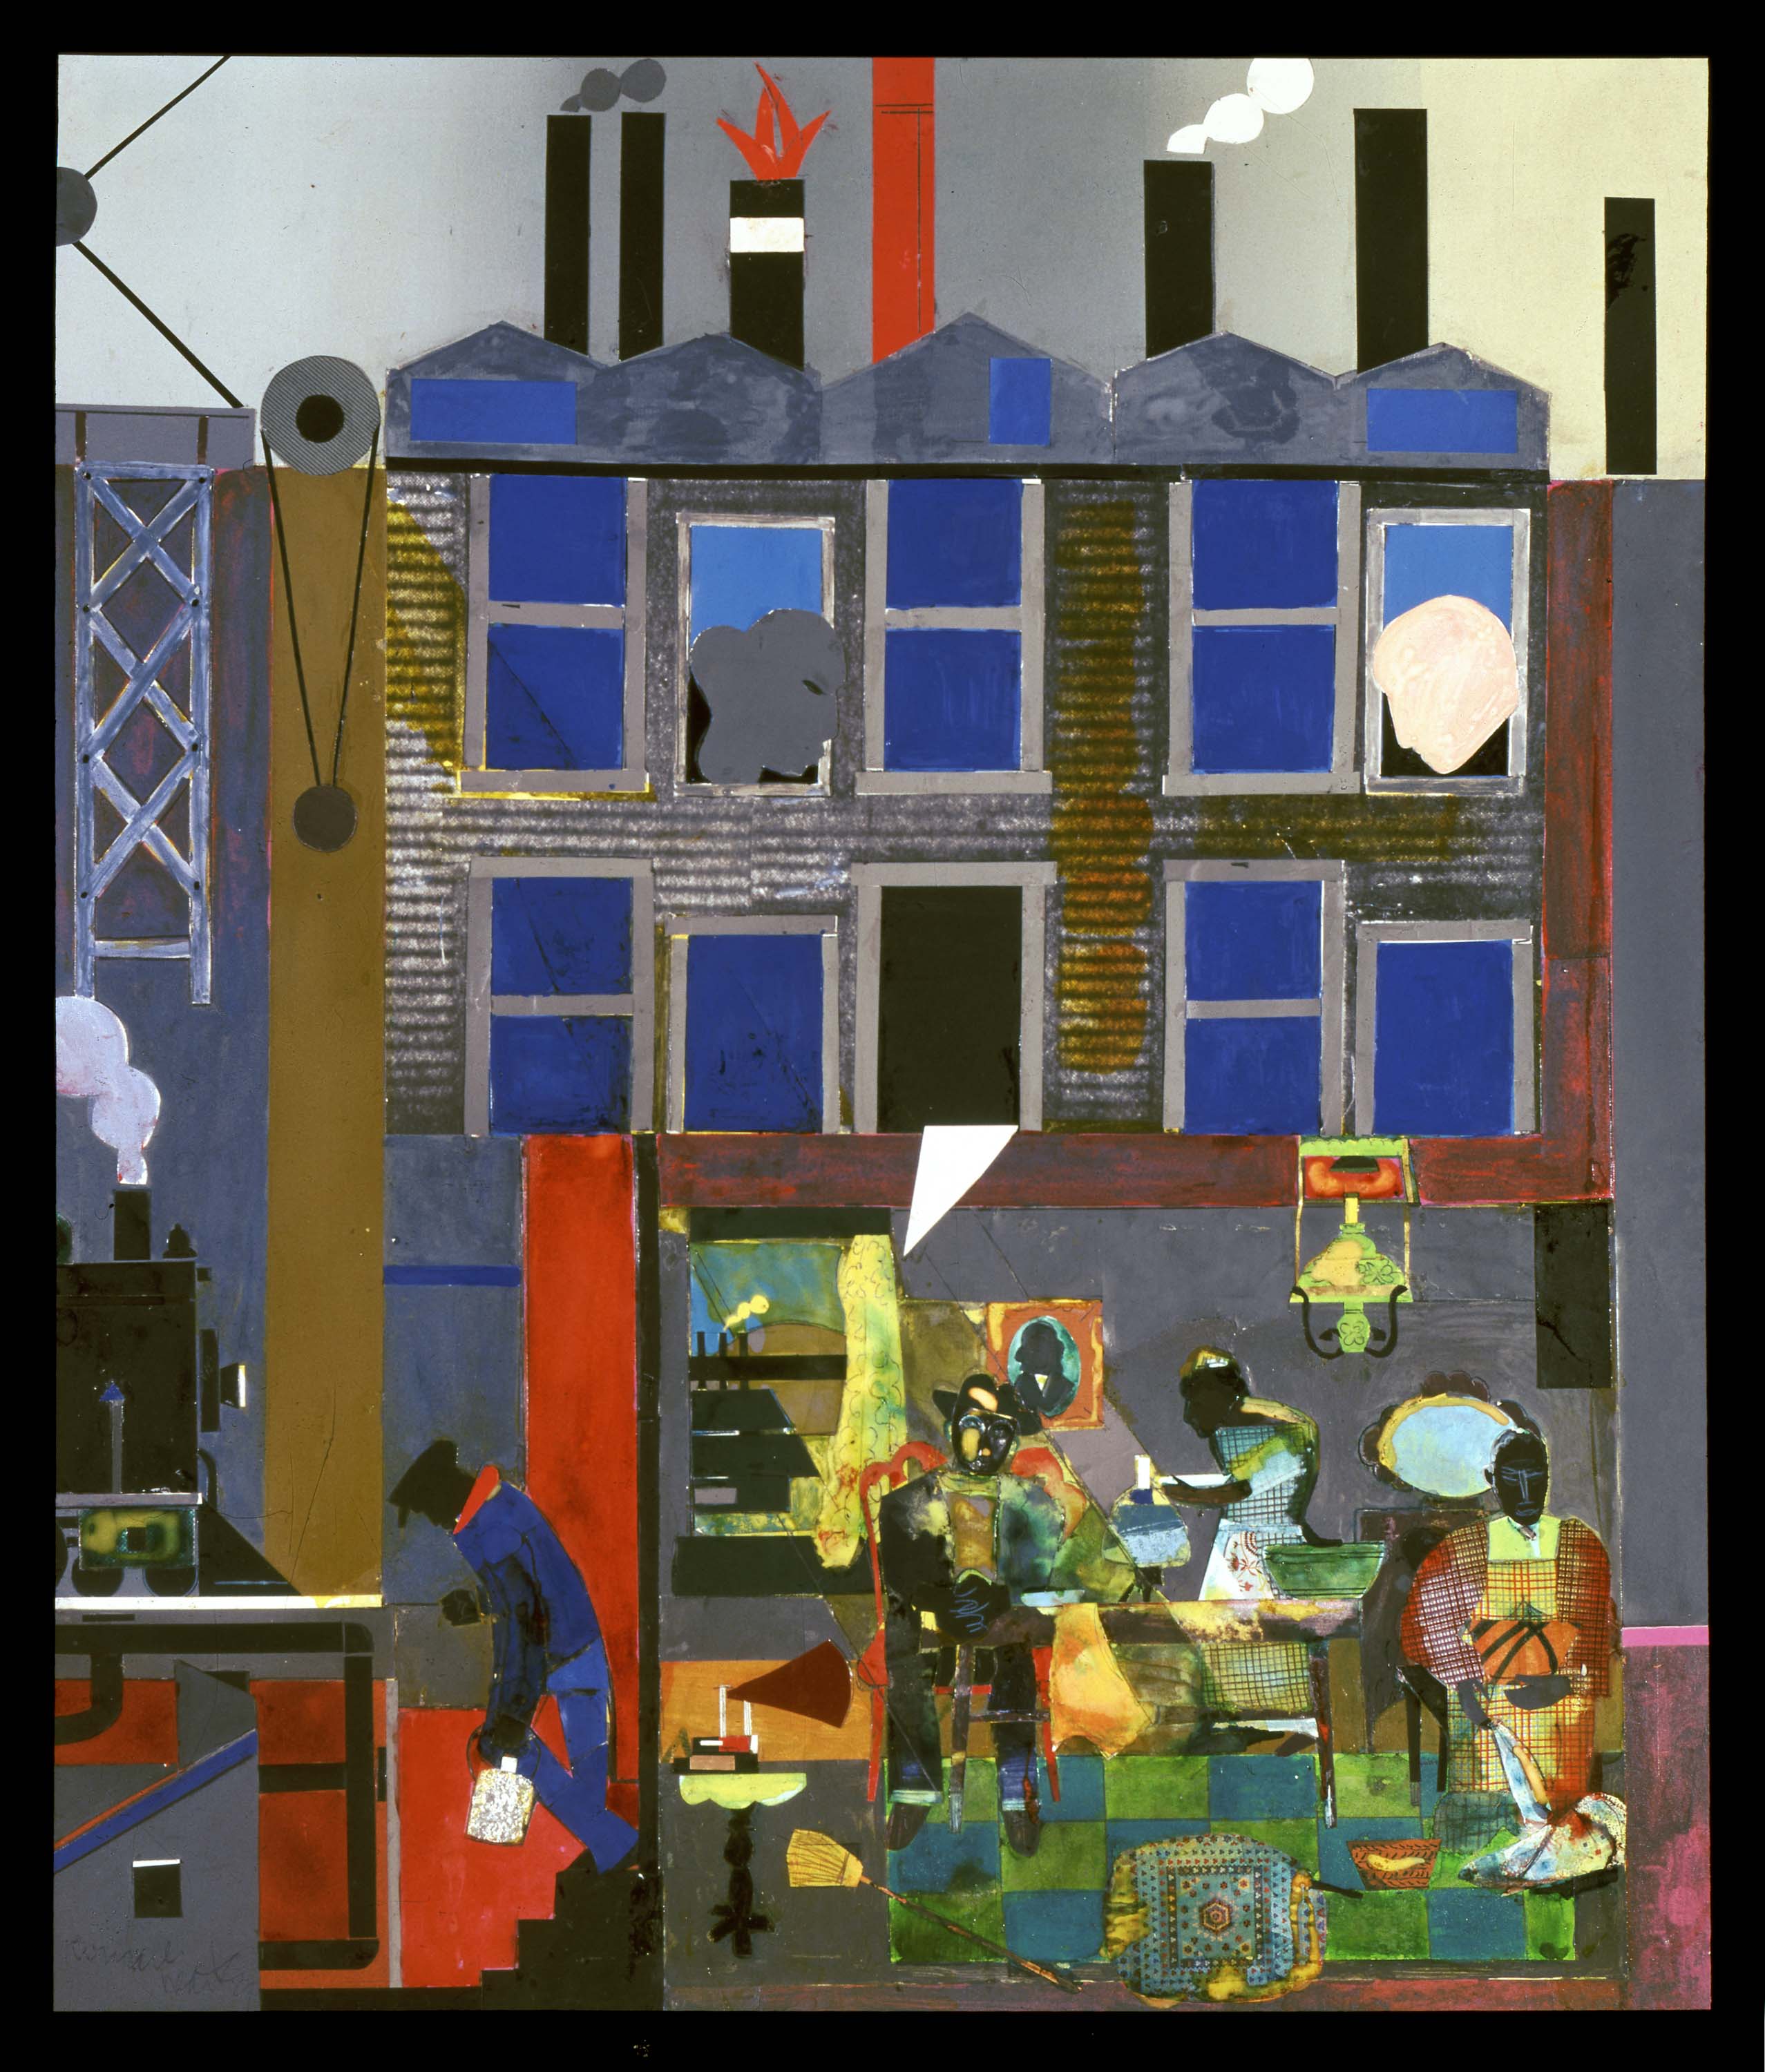 Romare Howard Bearden, Pittsburgh Memories, 1984, collage on board, Gift of Mr. and Mrs. Ronald R. Davenport and Mr. and Mrs. Milton A. Washington